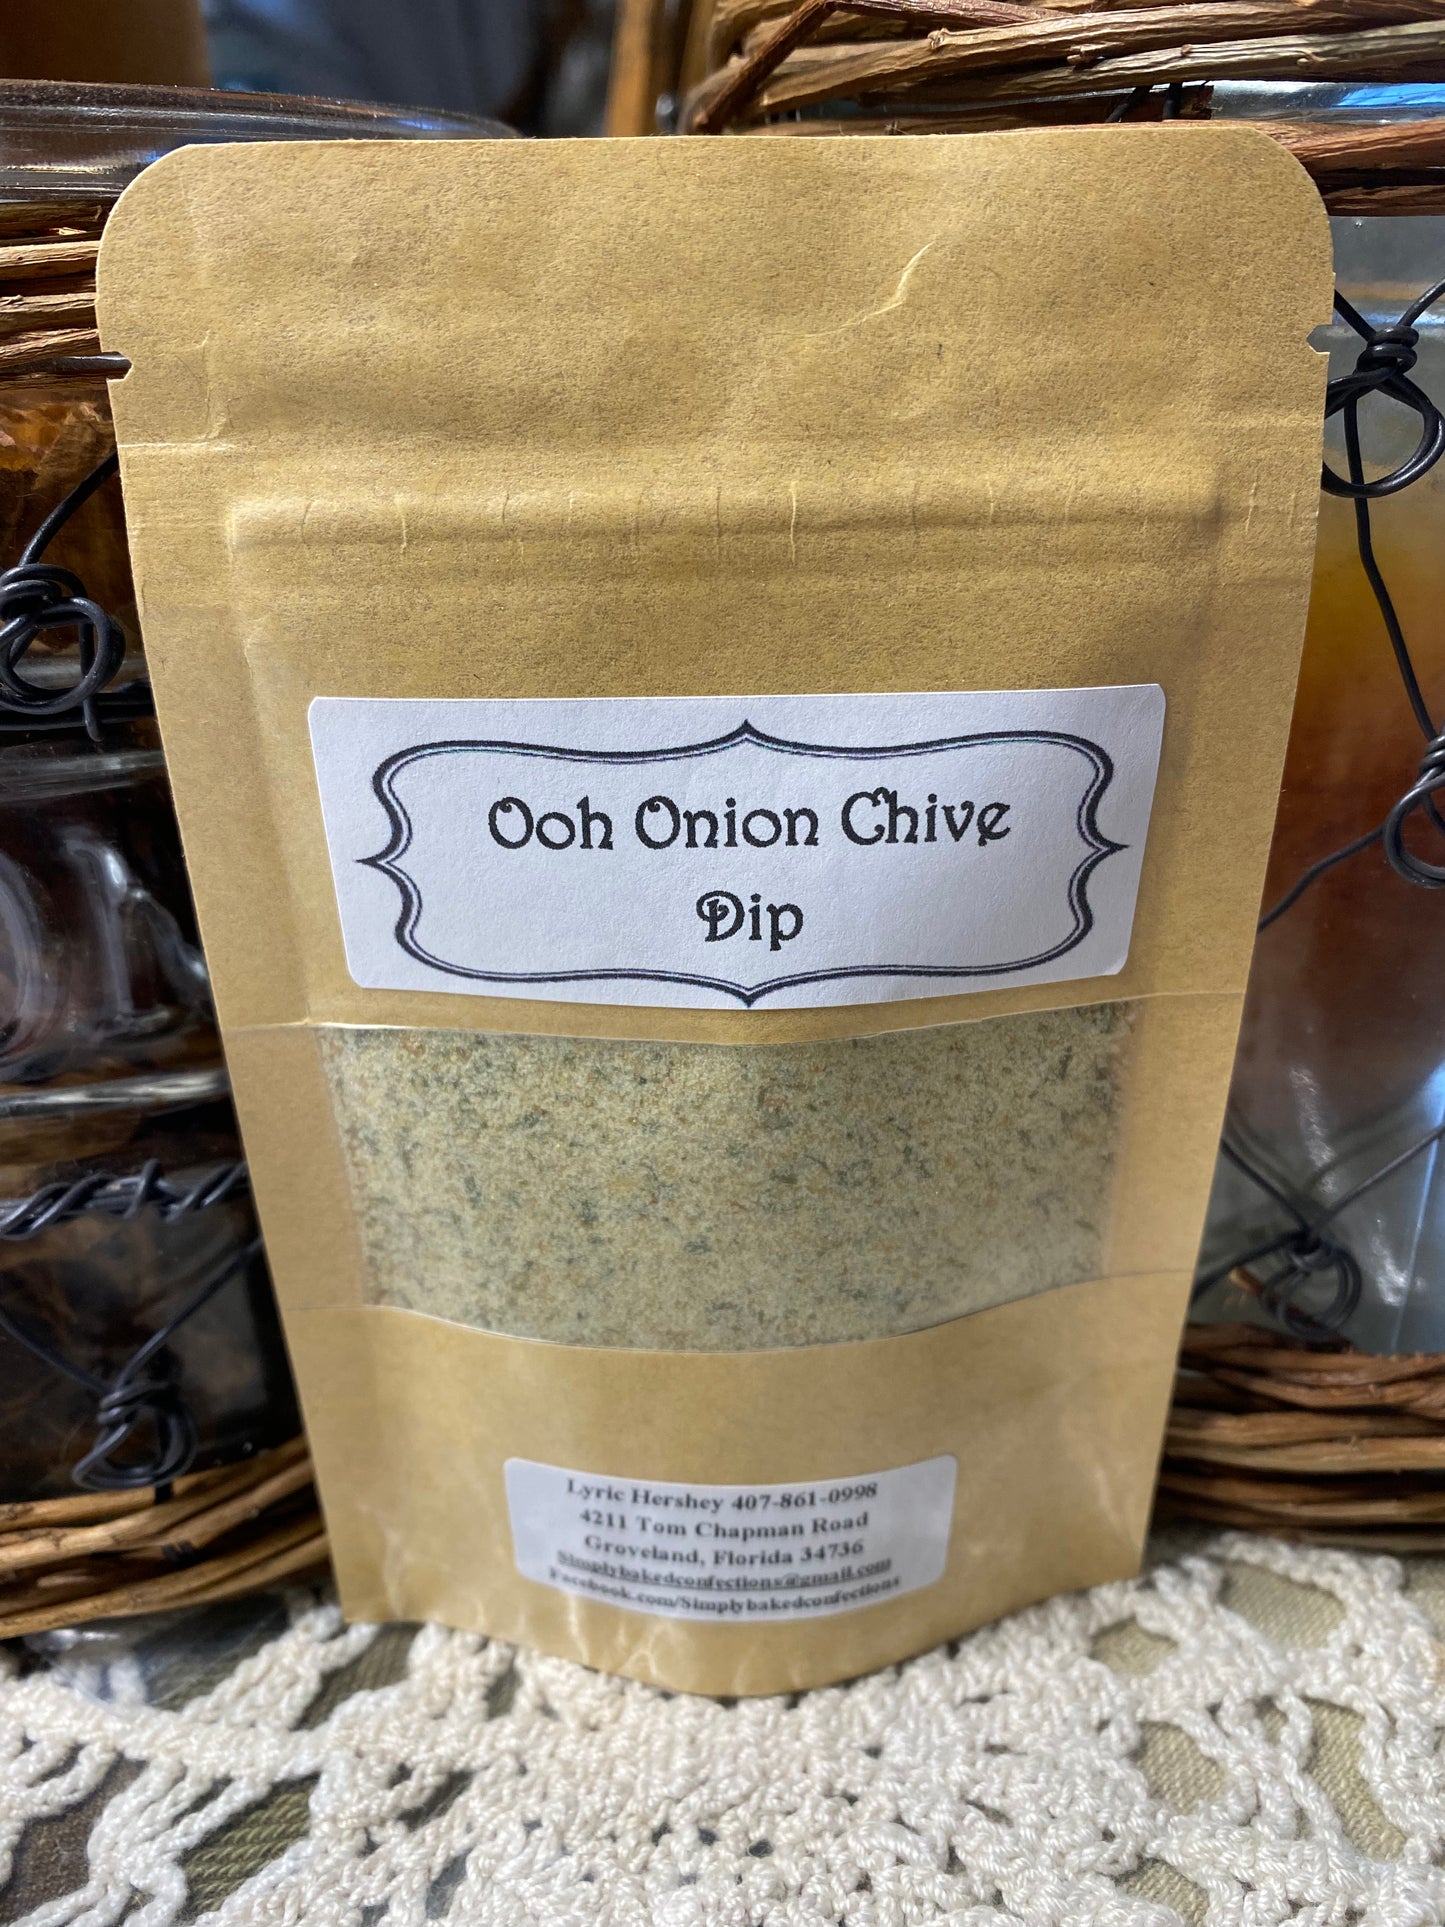 Ooh Onion Chive Dip Mix